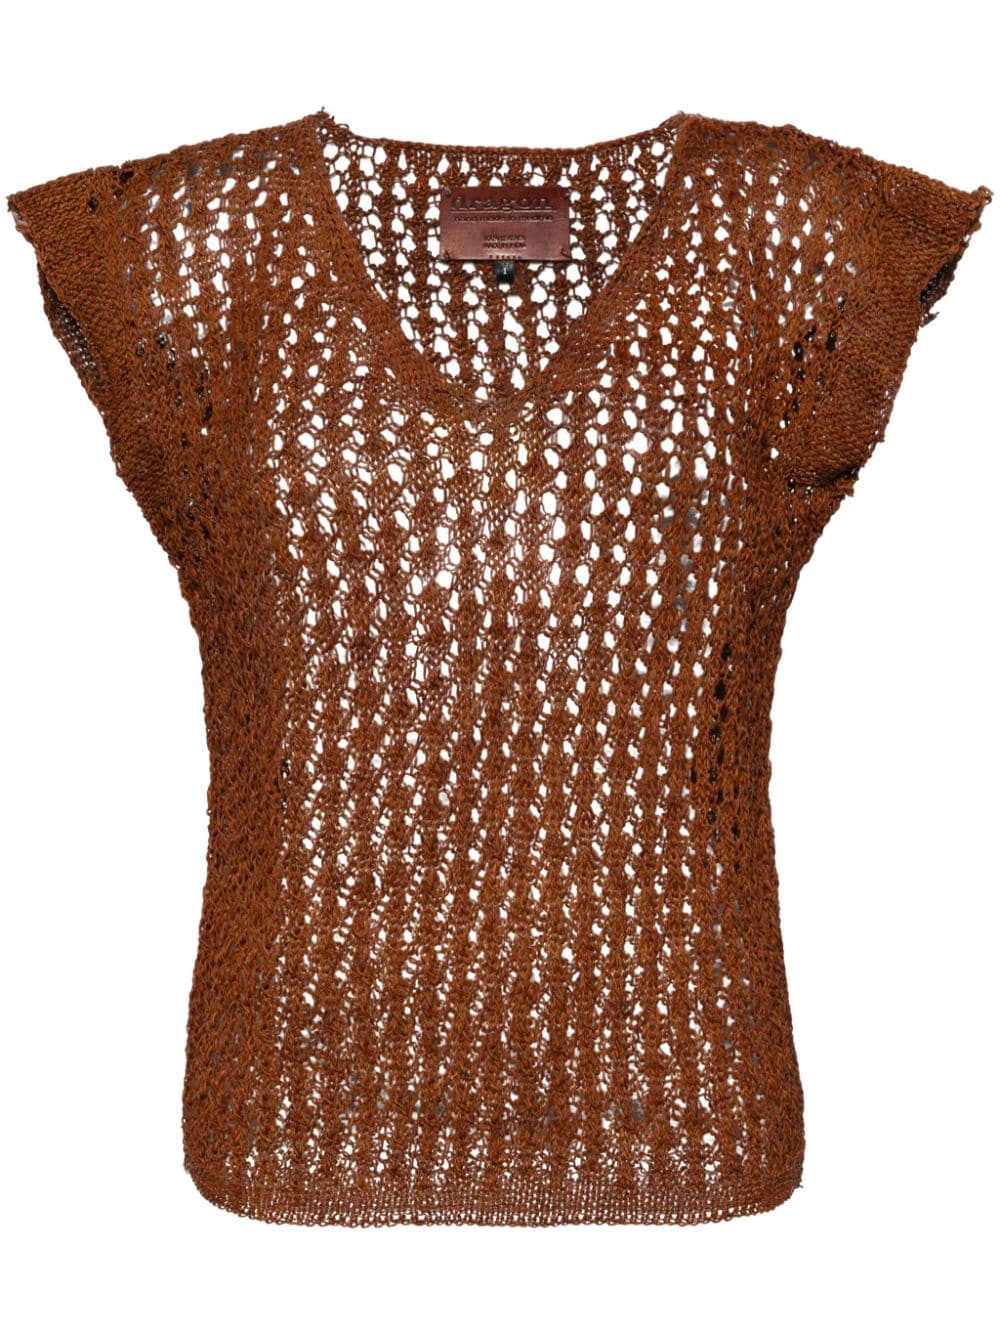 DRAGON DIFFUSION knitted leather top - Brown von DRAGON DIFFUSION